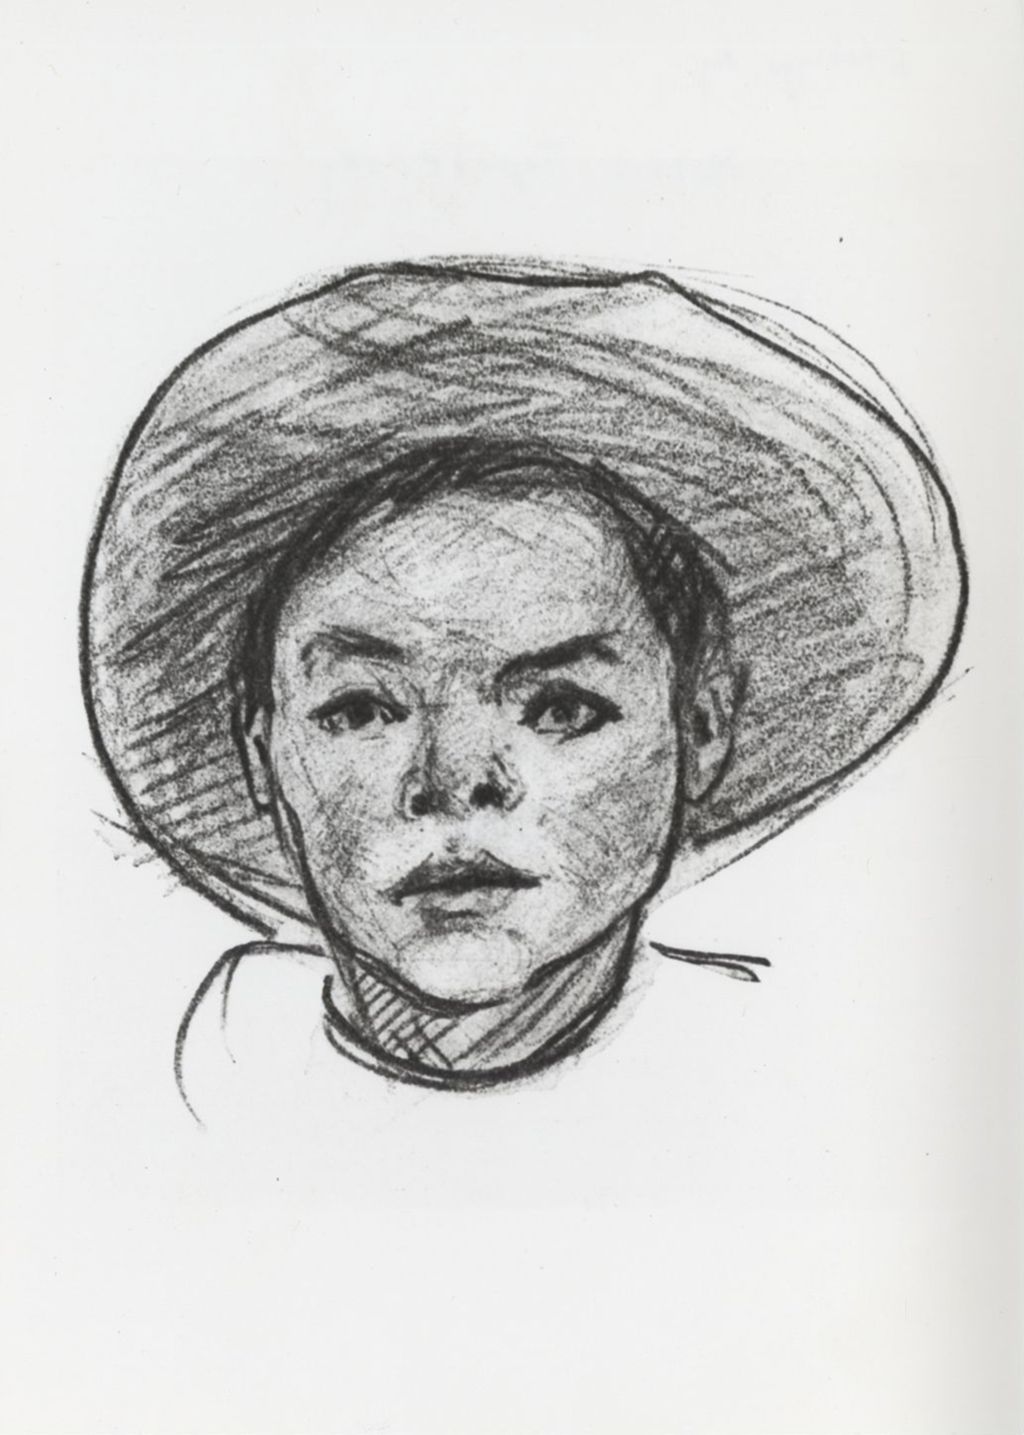 Etching by Morris Topchevsky of Mexican Boy